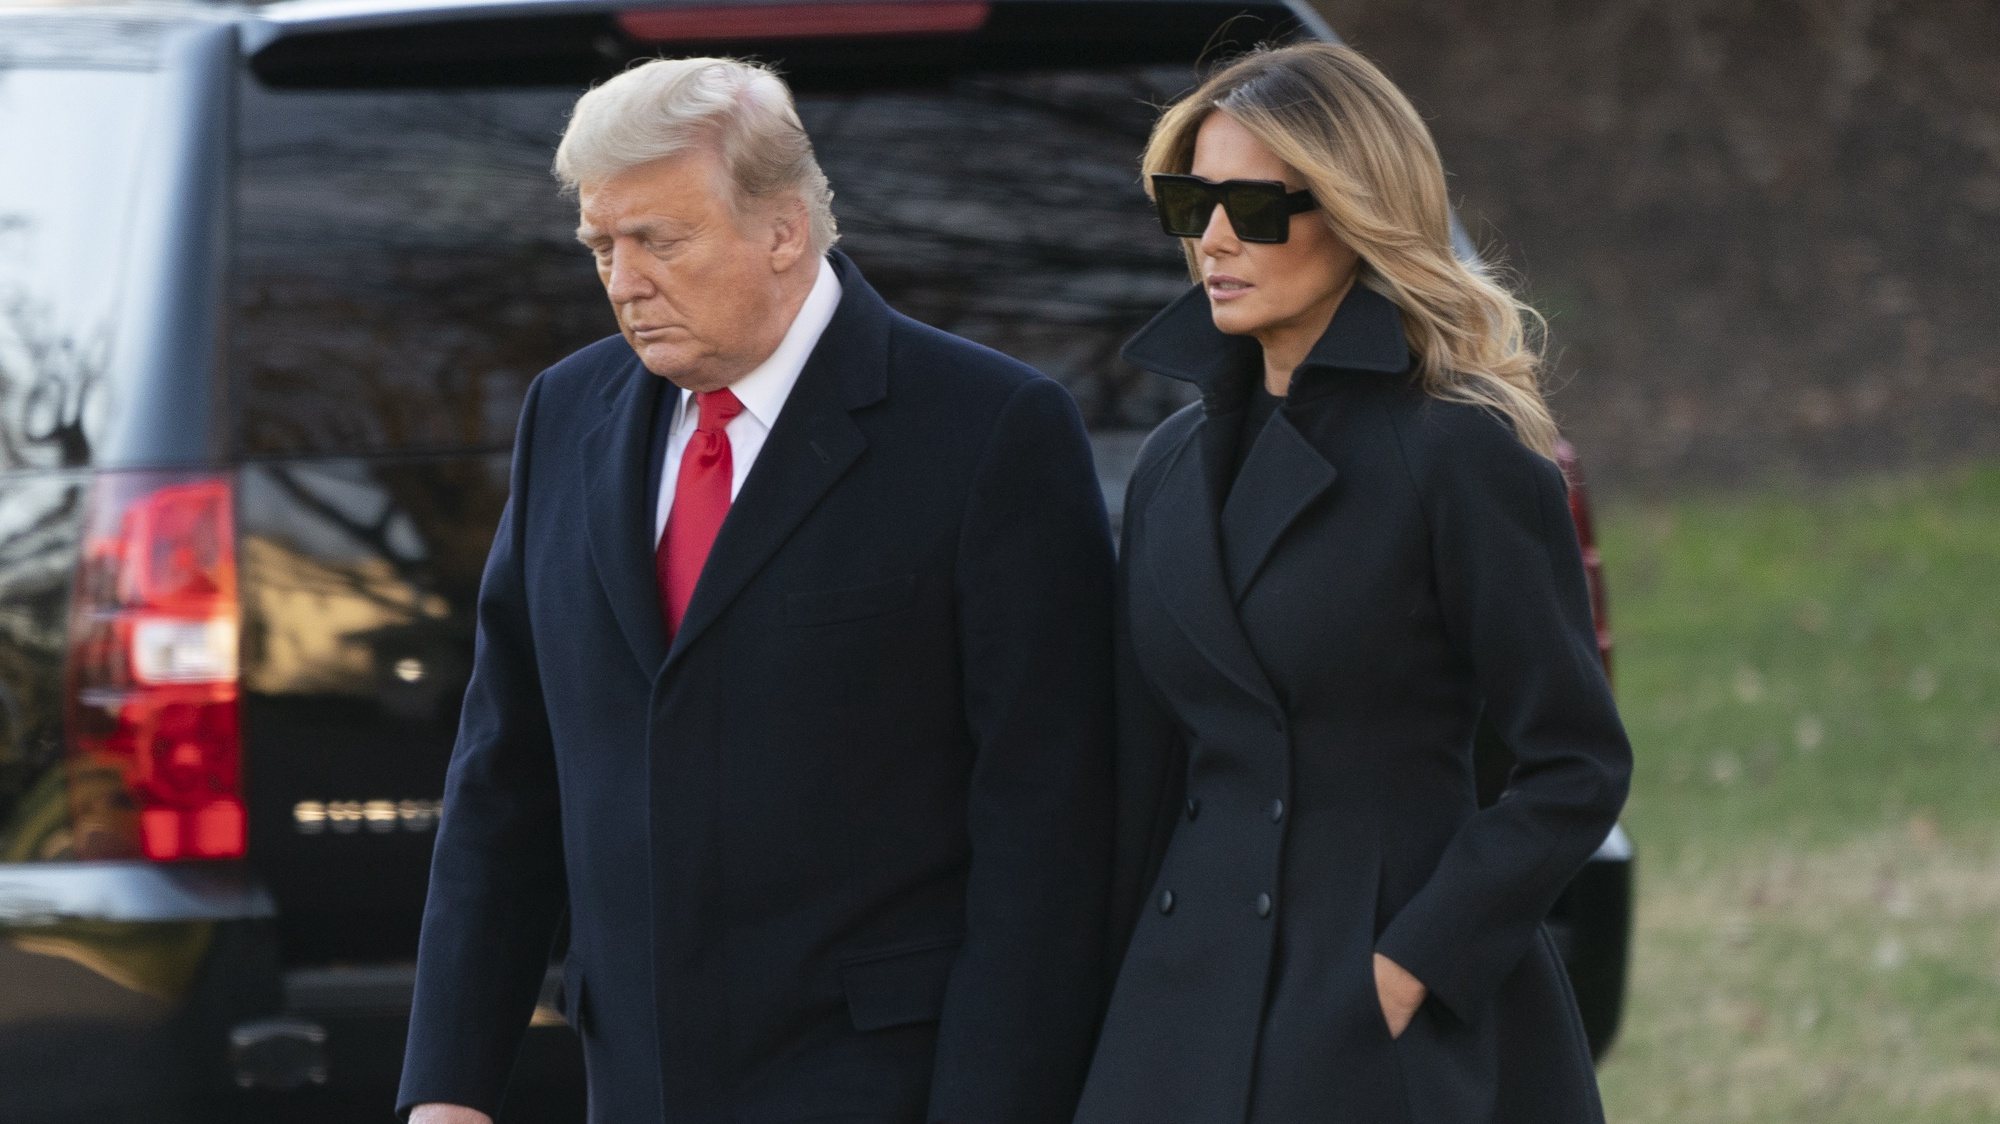 epa08901796 US President Donald J. Trump and First lady Melania Trump (R) depart the White House, in Washington, DC, USA, 23 December 2020, headed out to Mar-a-Lago in Palm Beach, Florida.  EPA/Chris Kleponis / POOL